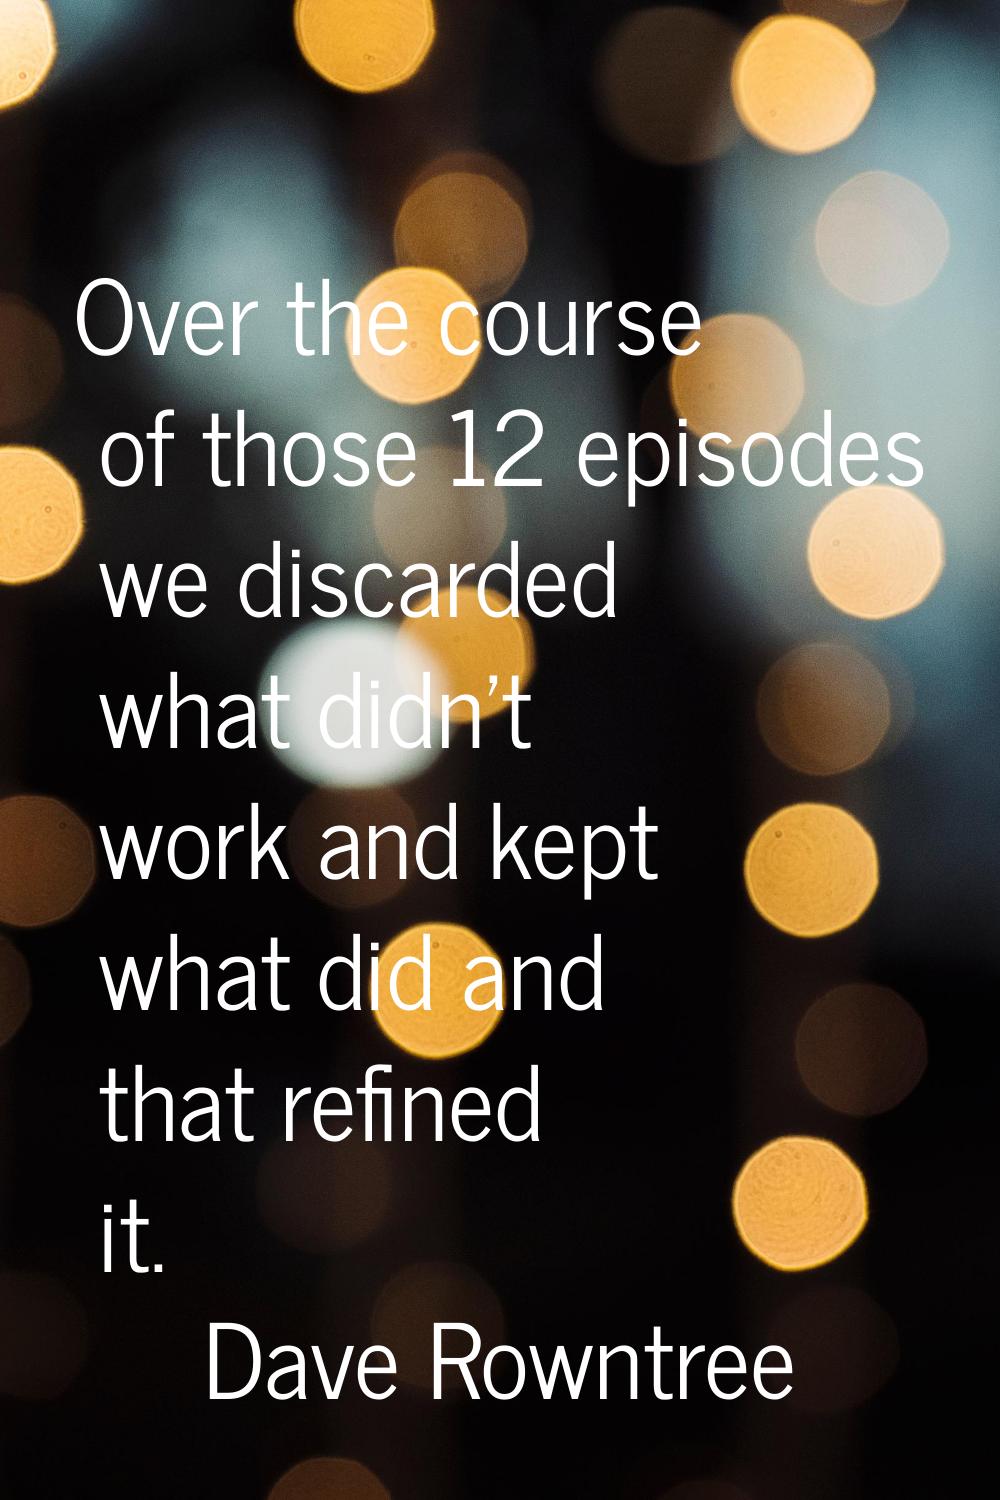 Over the course of those 12 episodes we discarded what didn't work and kept what did and that refin